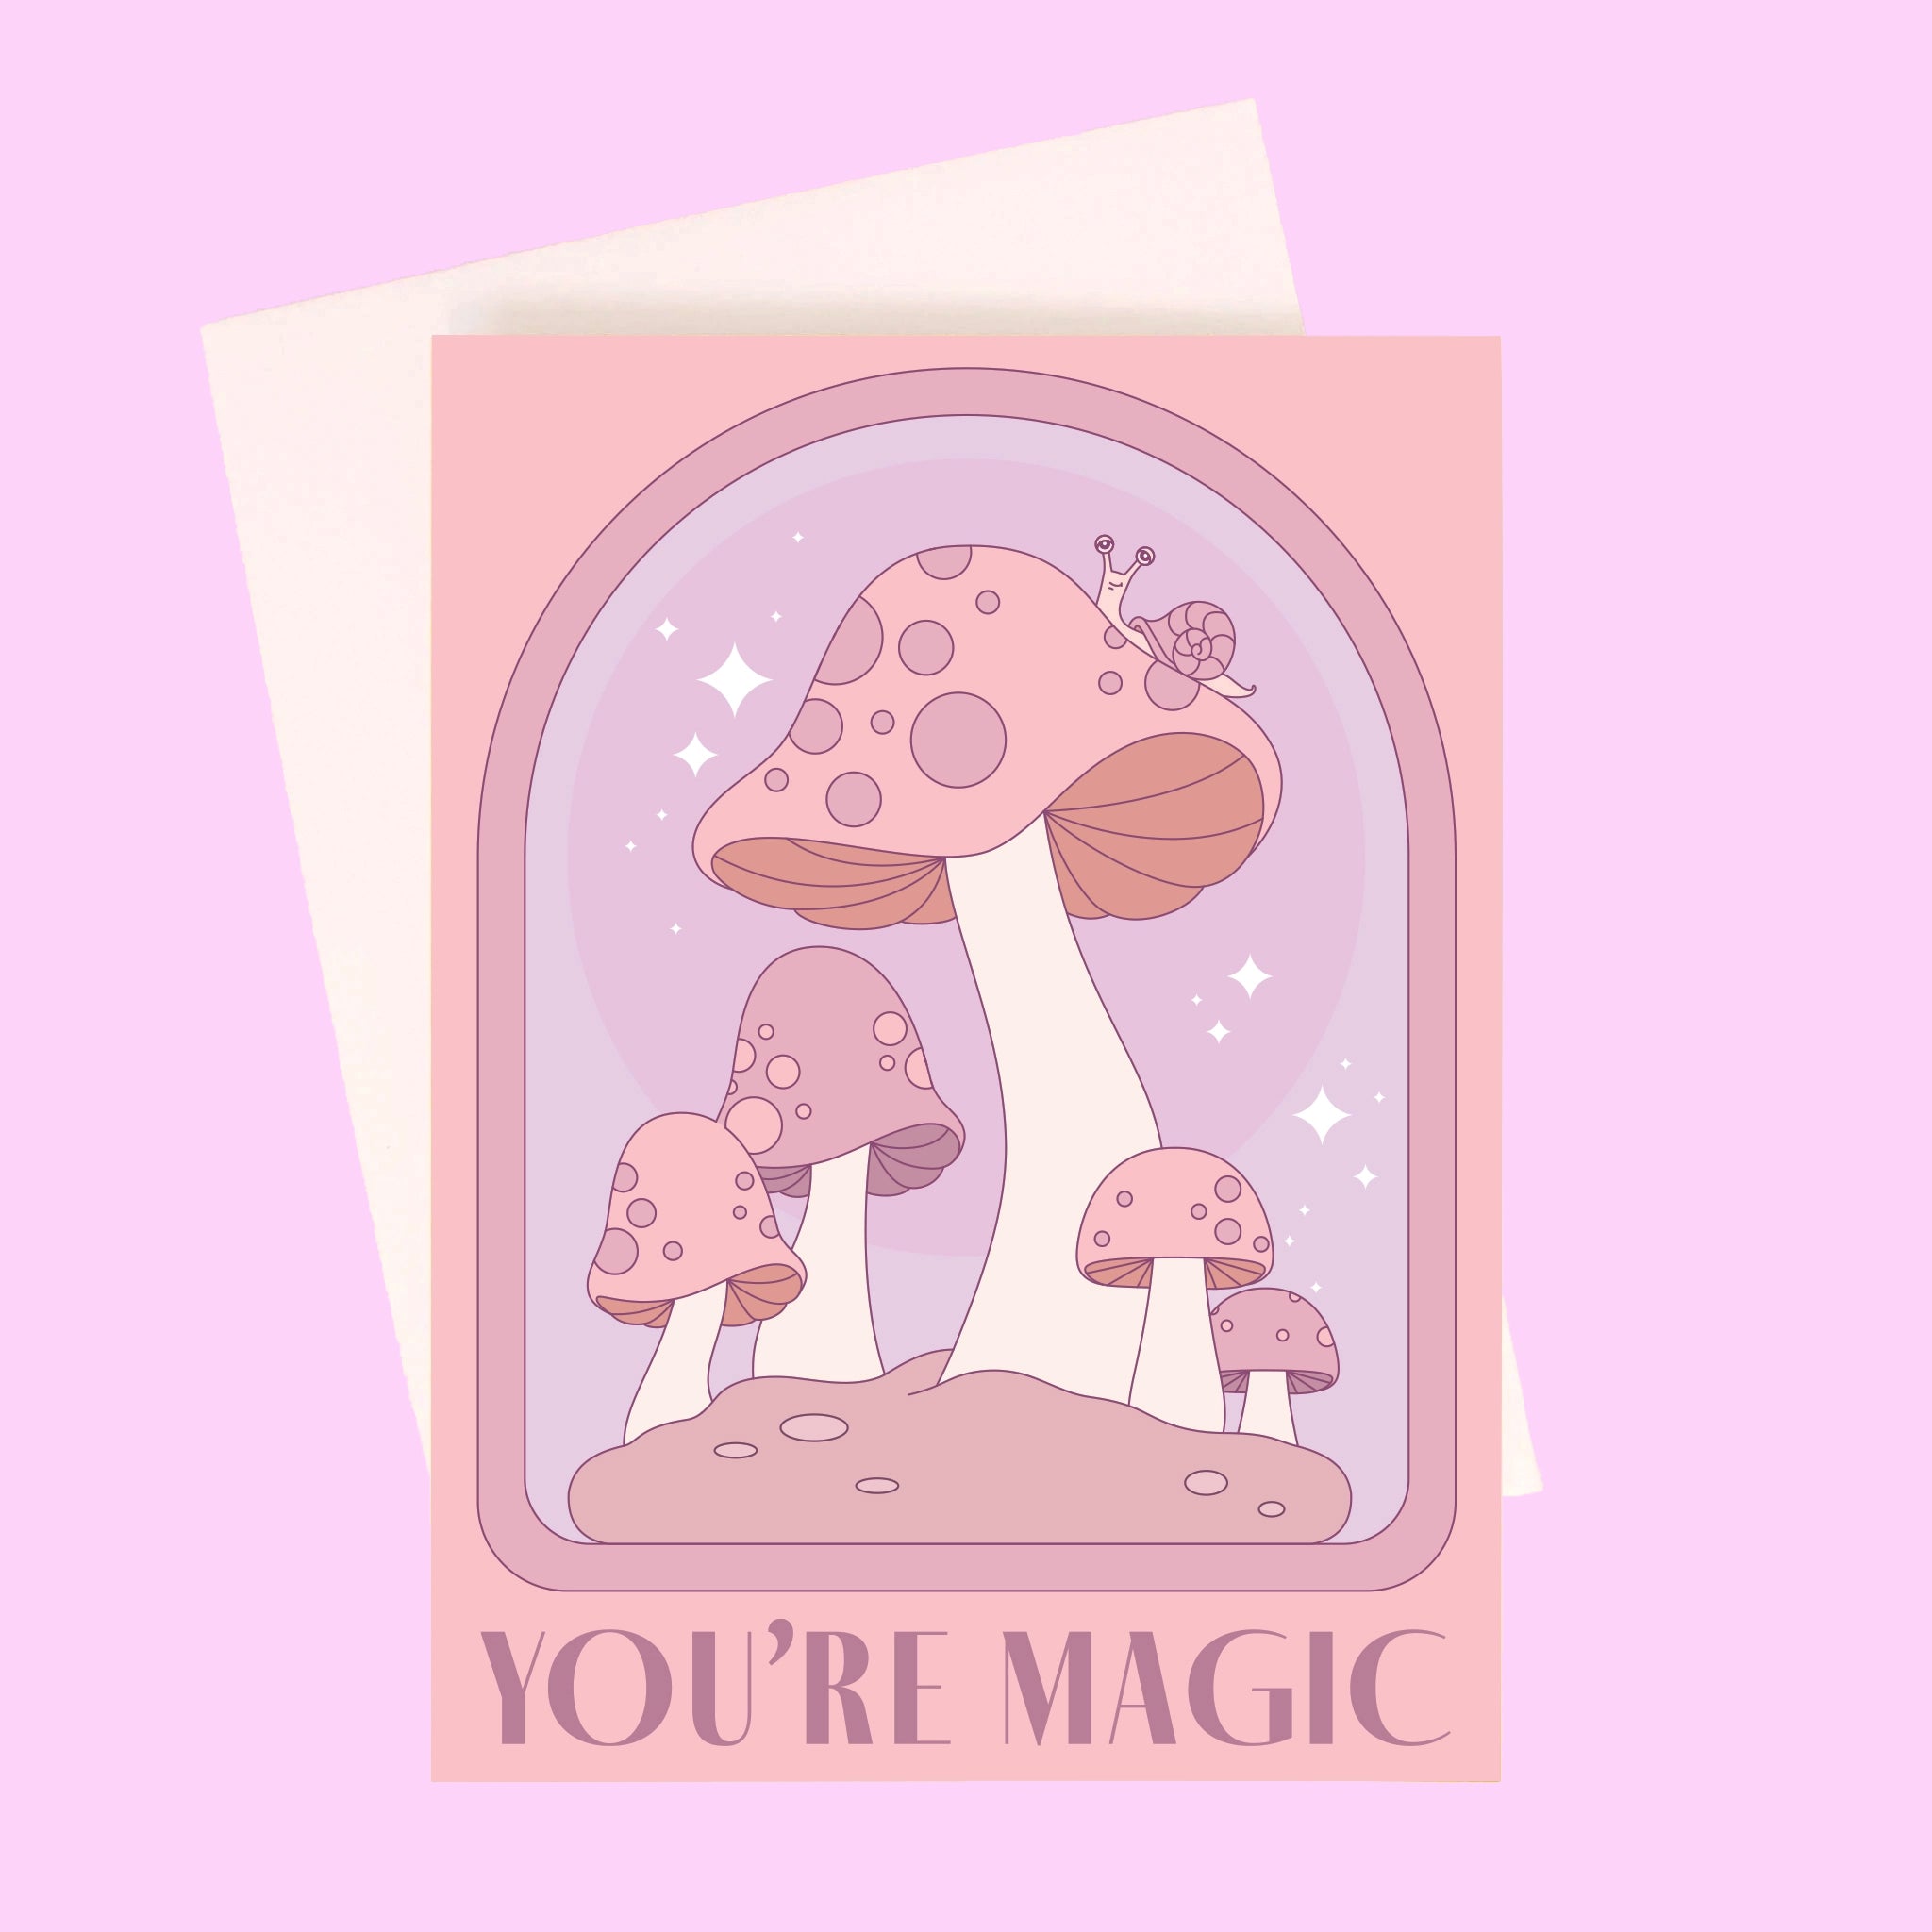 On a light purple background is a pink and purple card with an arch and mushroom design as well as text along the bottom that reads, "You're Magic". A white envelope is included with purchase, also shown here.